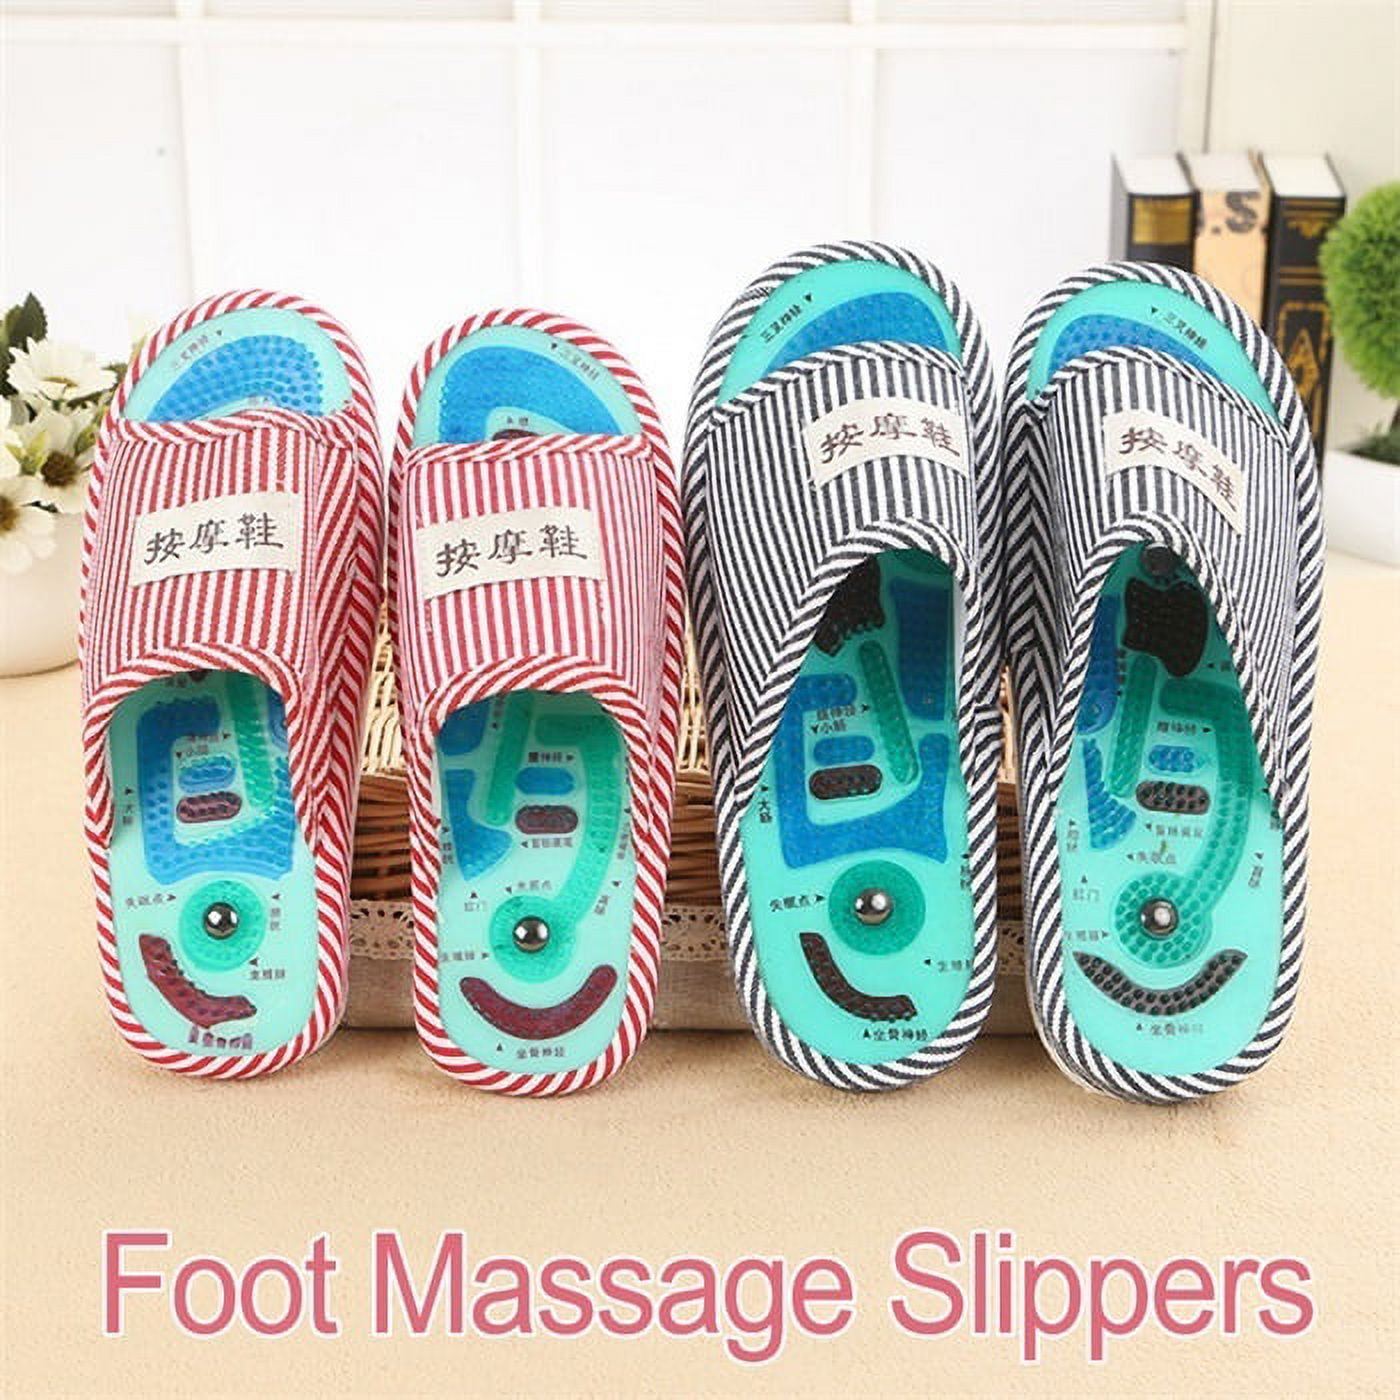 Magnetic Kansya Wati Foot Massager Slippers With Acupuncture Therapy For  Reflexology And Healthy Feet Care C18122801 From Shen8401, $7.03 |  DHgate.Com